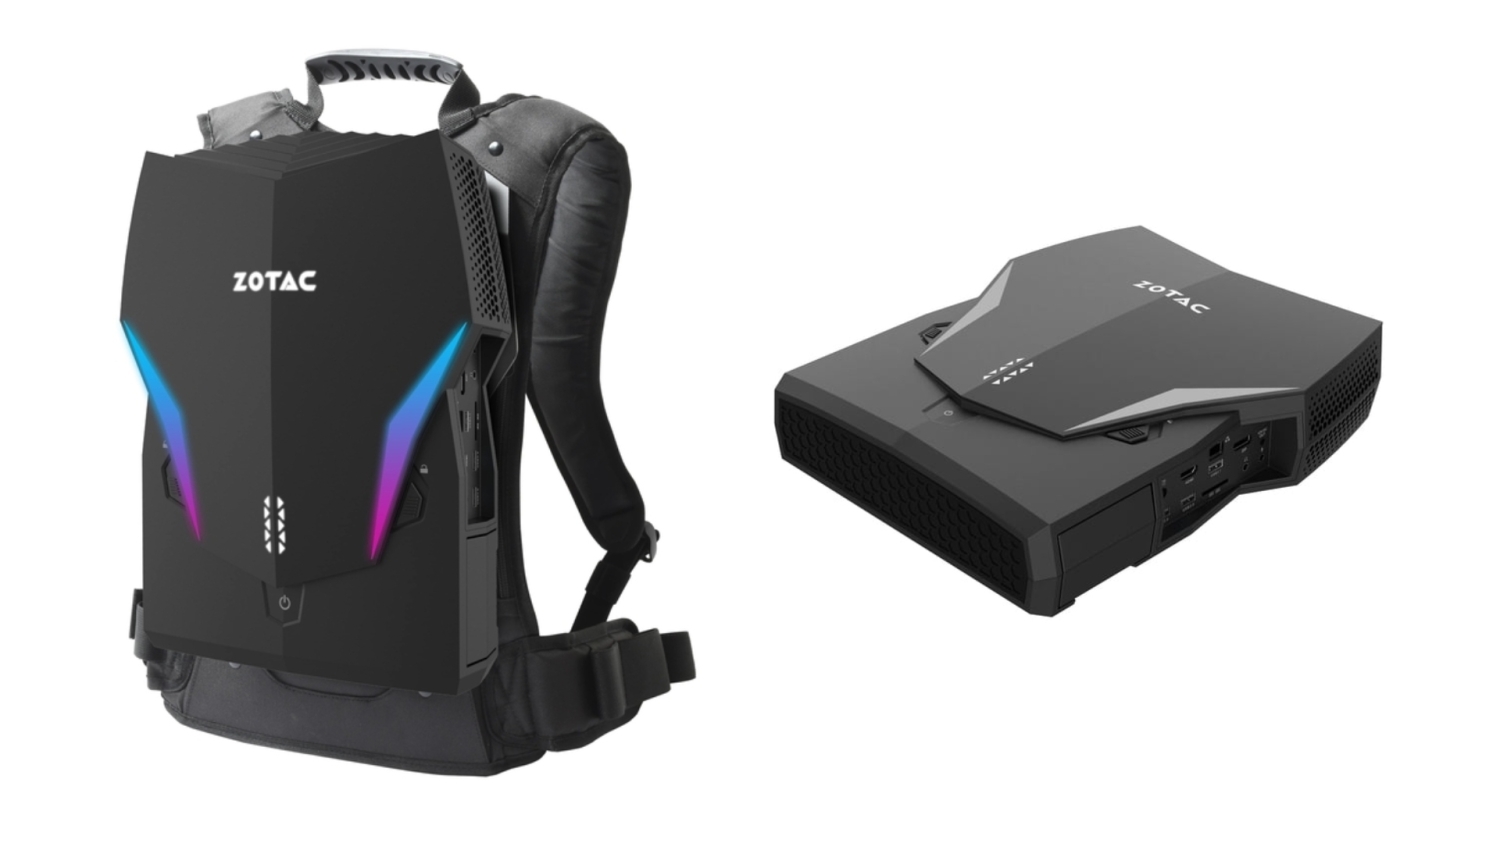 ZOTAC VR GO 4 wearable backpack PCs feature Intel CPUs and pro-grade ...